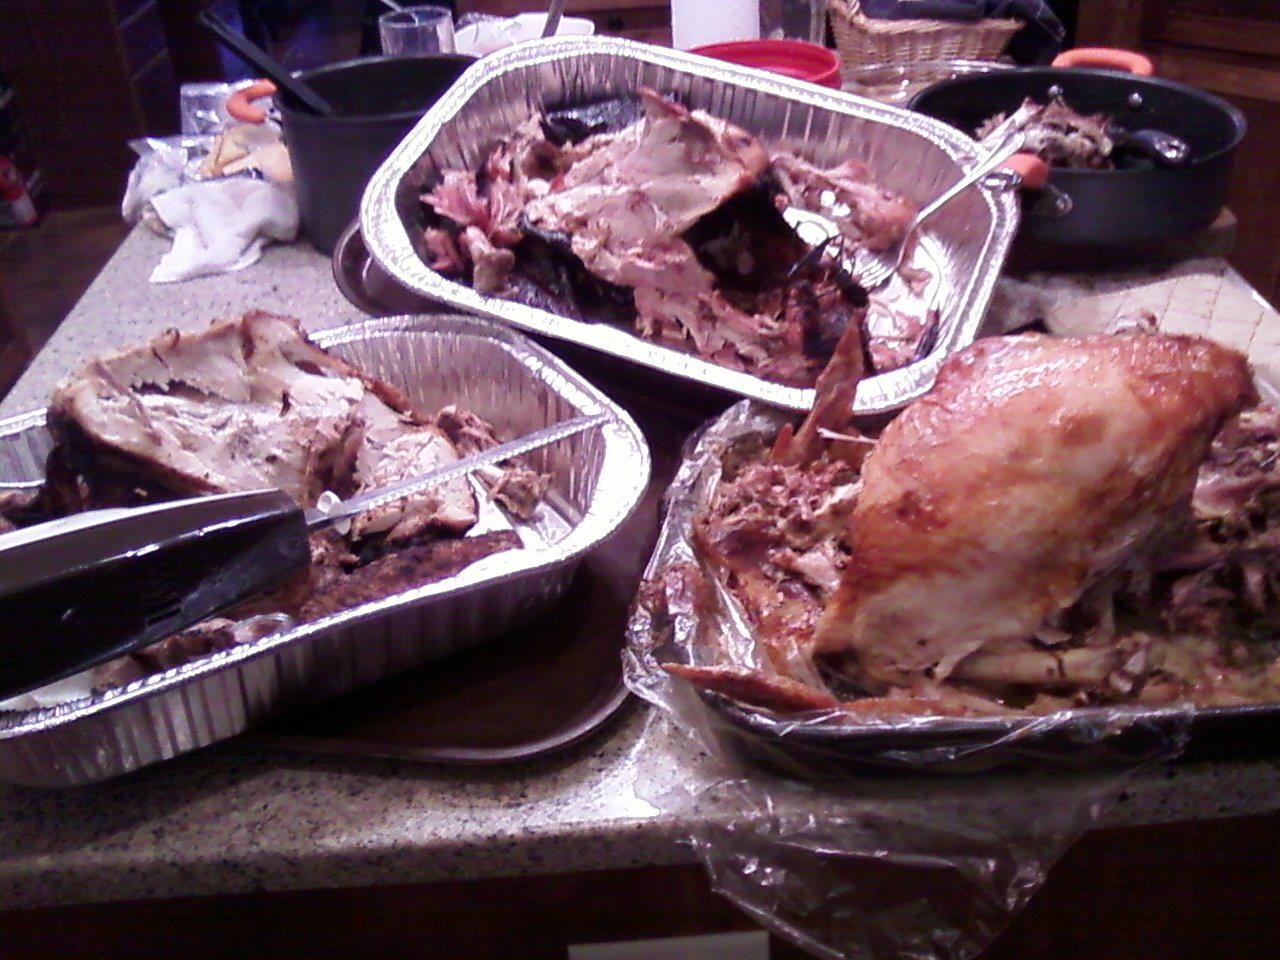 Three cooked and partially eaten turkeys in separate roasting pans